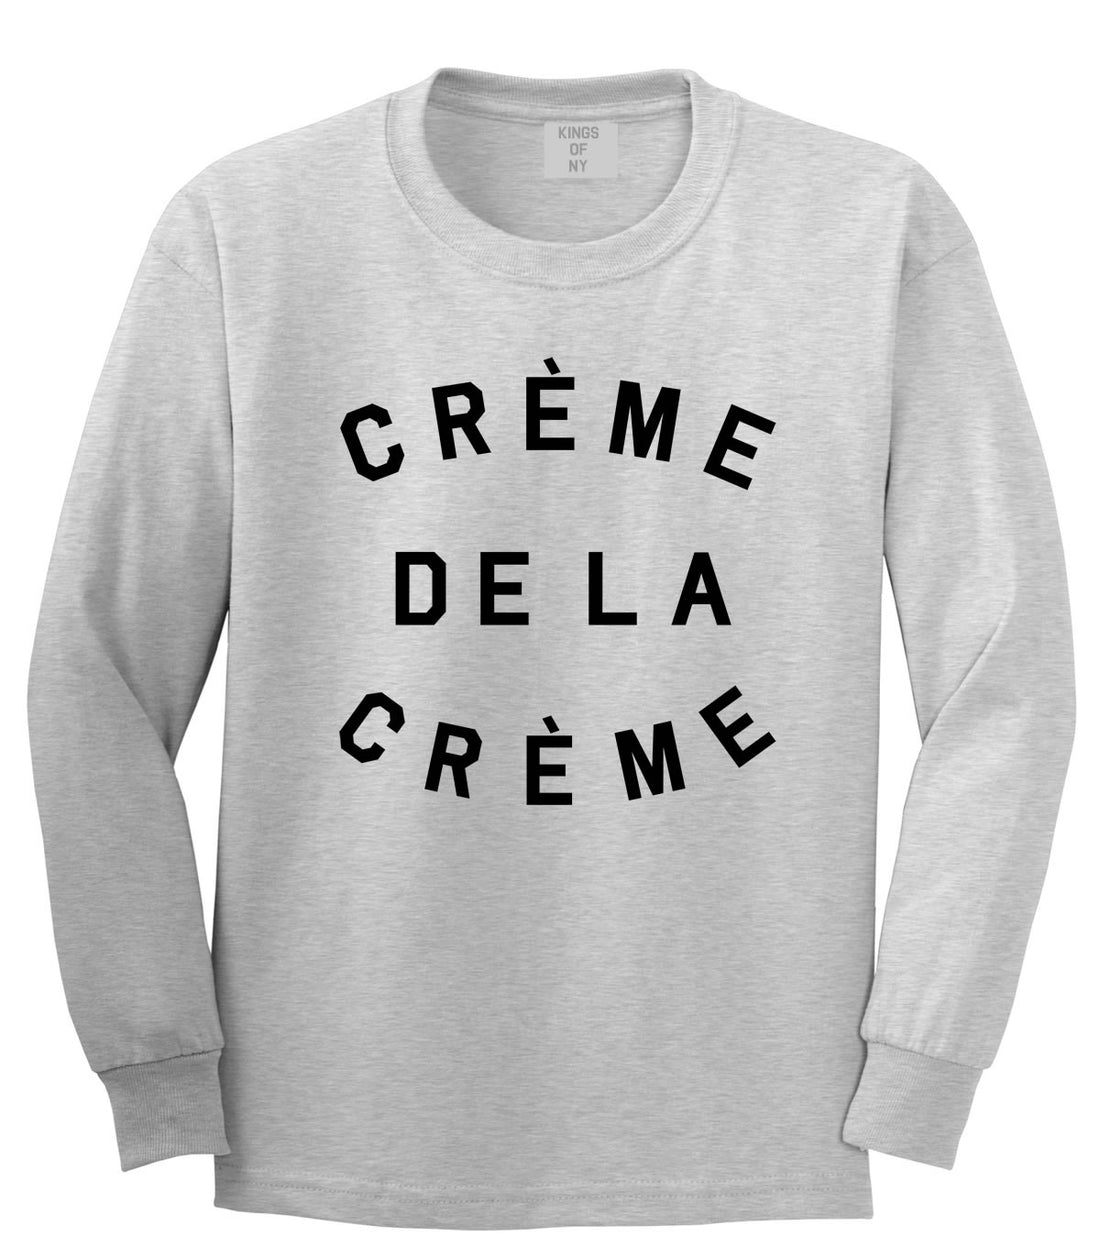 Creme De La Creme Celebrity Fashion Crop Long Sleeve T-Shirt In Grey by Kings Of NY